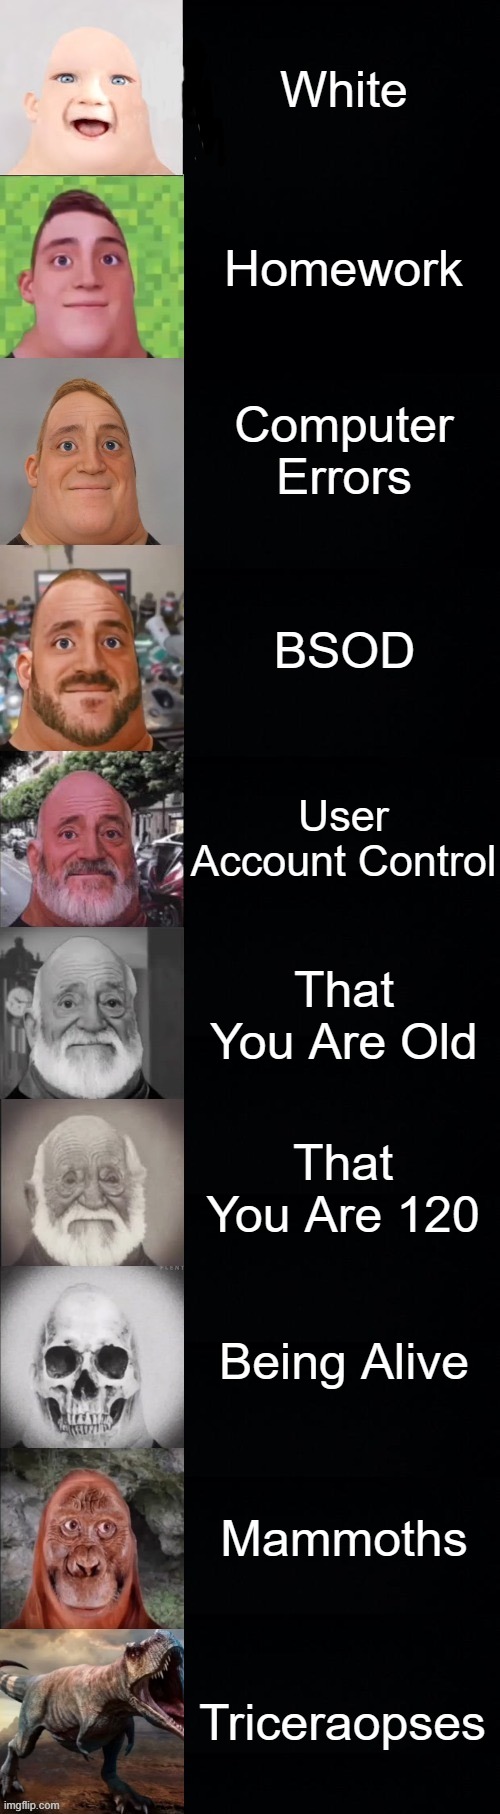 Mr incredible becoming old (you hate) | White; Homework; Computer Errors; BSOD; User Account Control; That You Are Old; That You Are 120; Being Alive; Mammoths; Triceraopses | image tagged in mr incredible becoming old | made w/ Imgflip meme maker